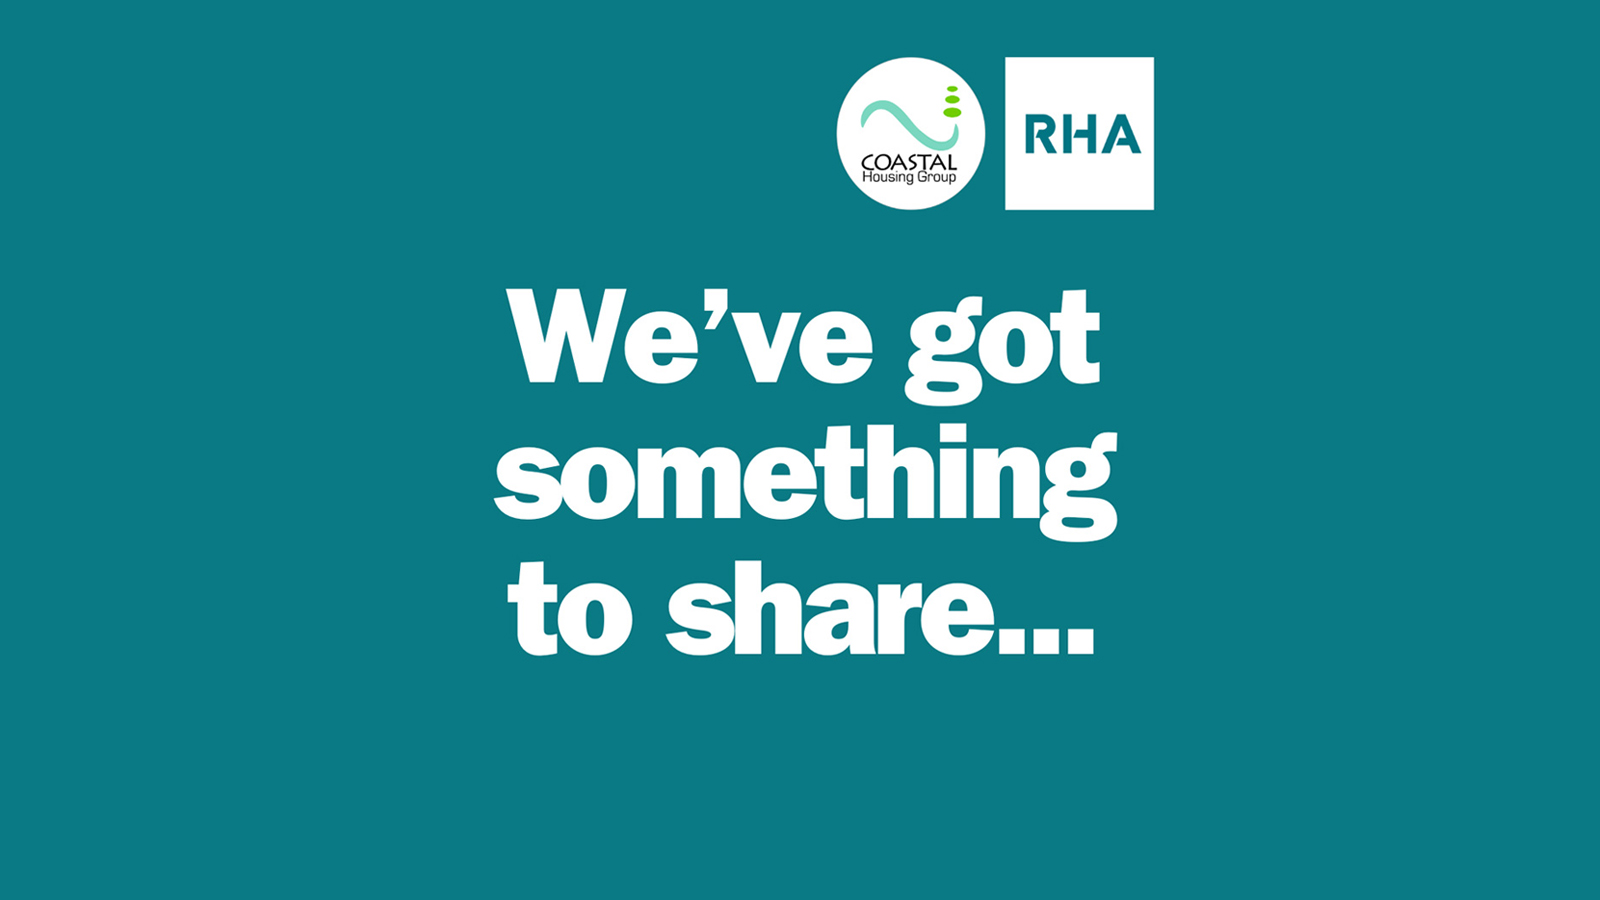 RHA and Coastal Housing are creating a new, combined organisation